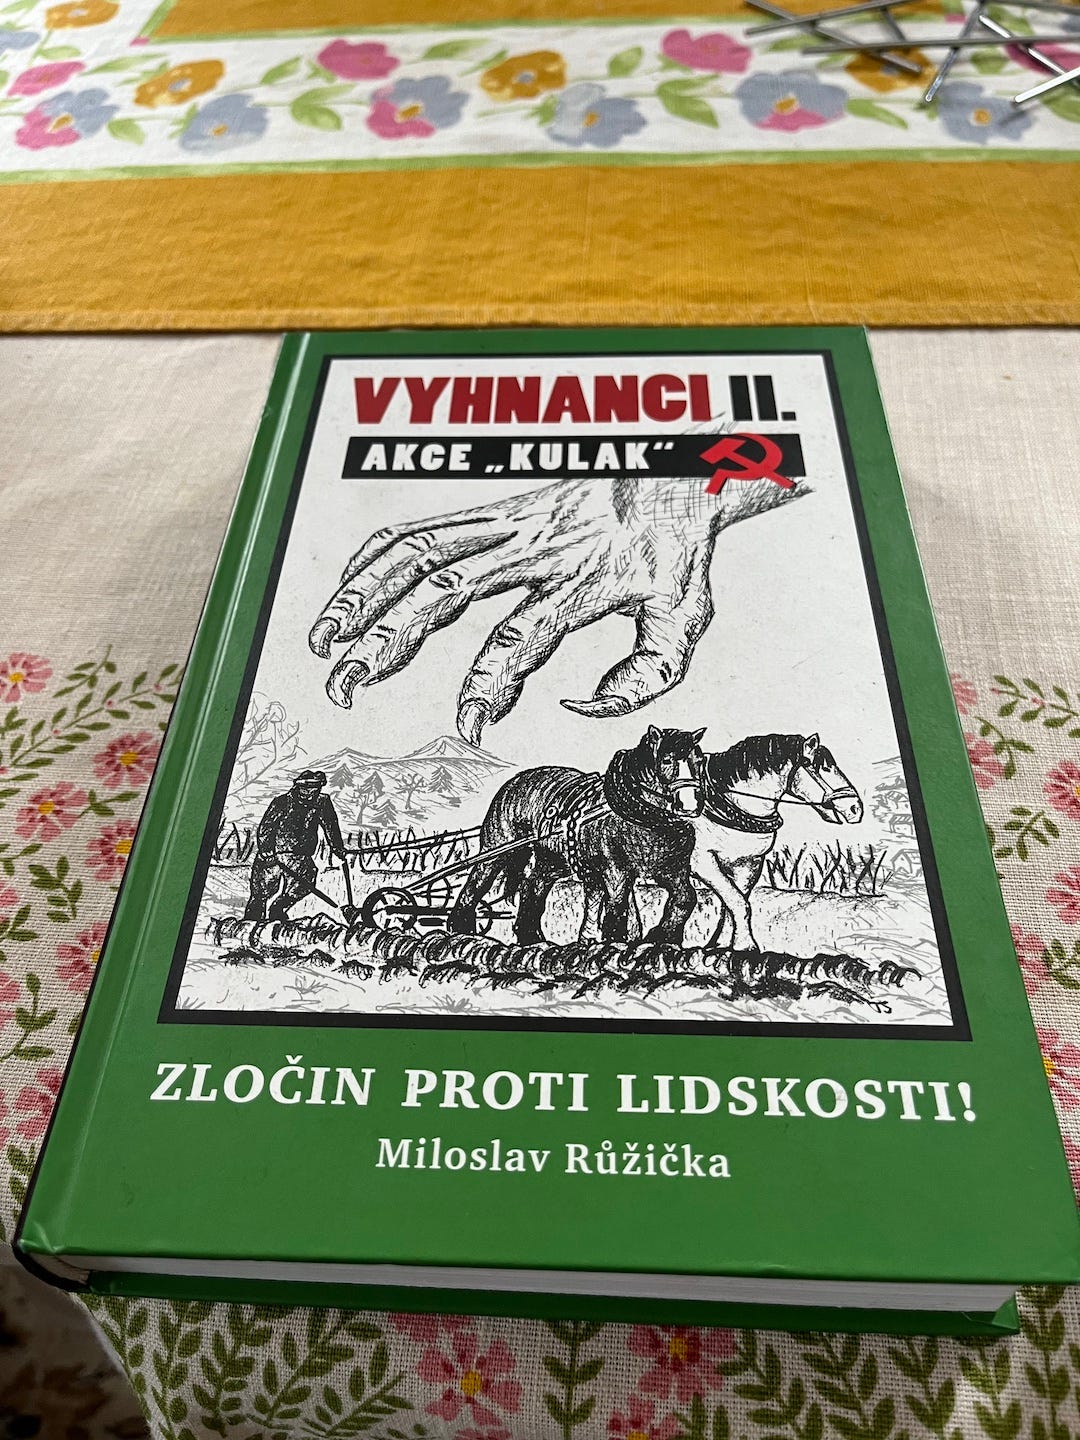 A cover of a book called crimes against humanity about communist rule in the czech republic